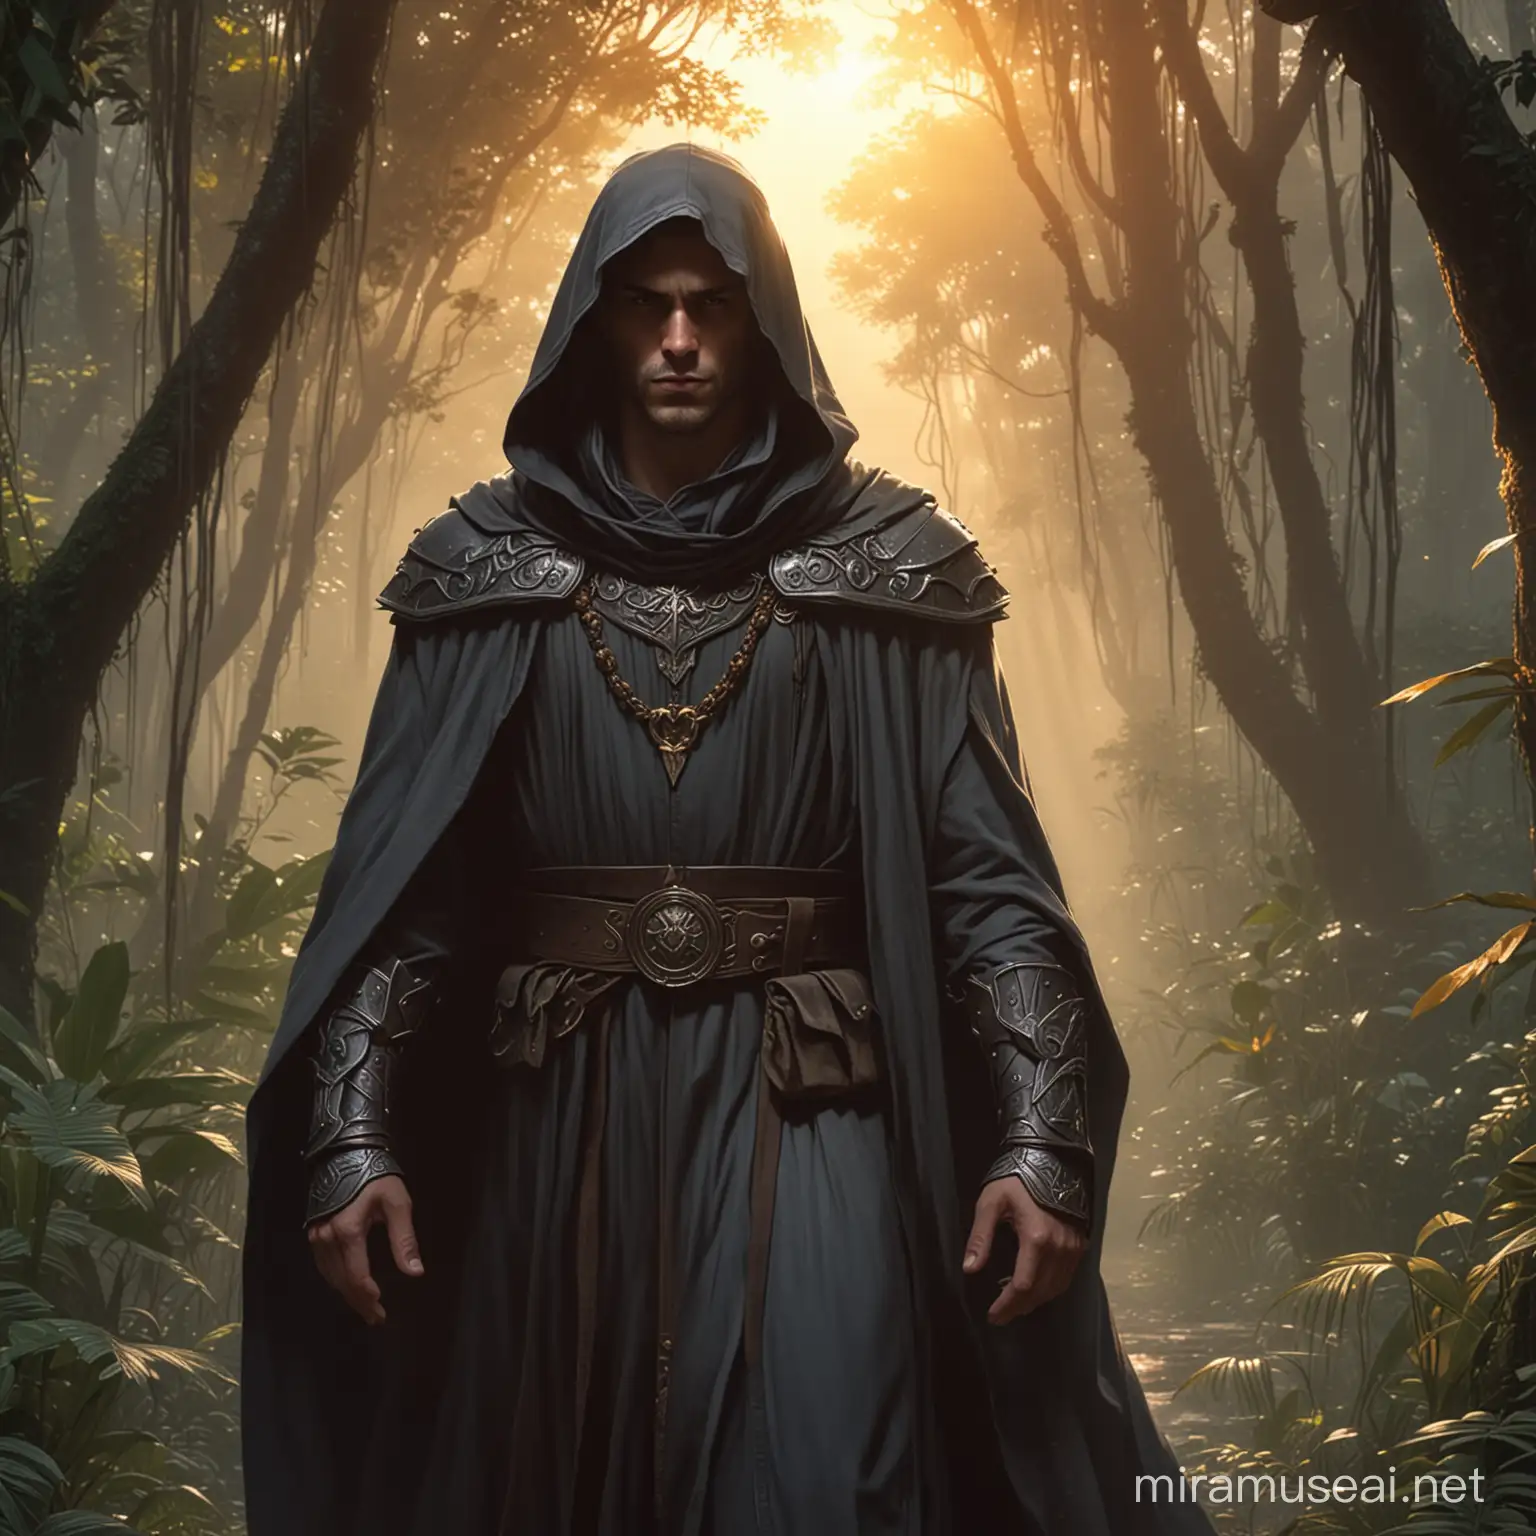 male twilight cleric simple long flowing dark gray robes face hidden under a hood sun setting in jungle in background